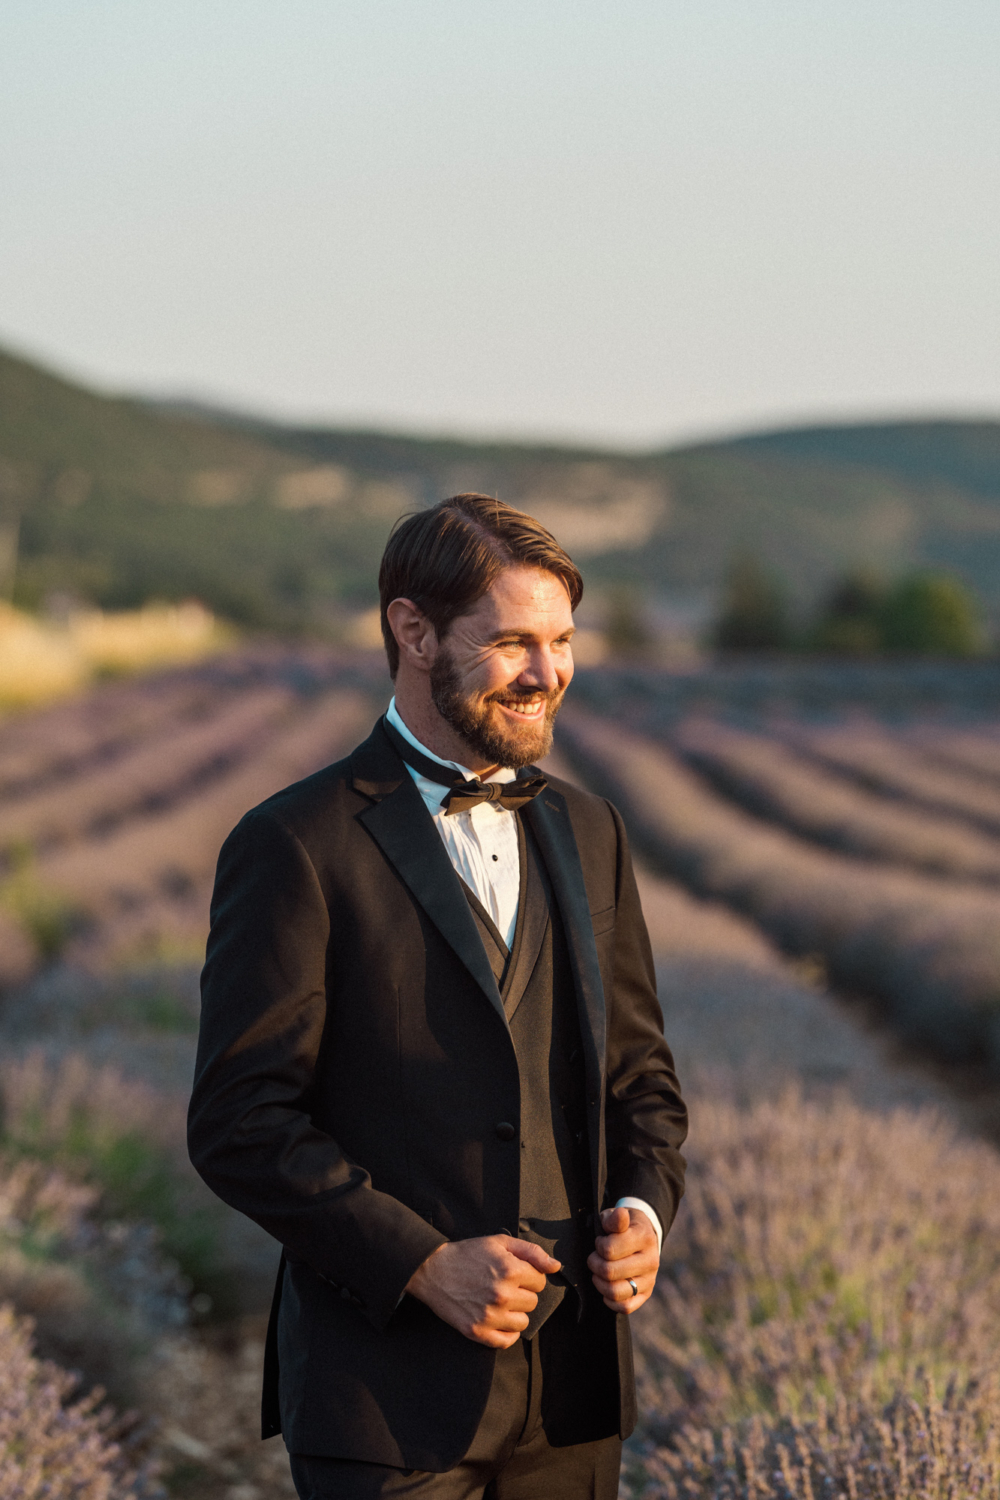 handsome groom posing in a tux in a lavender field